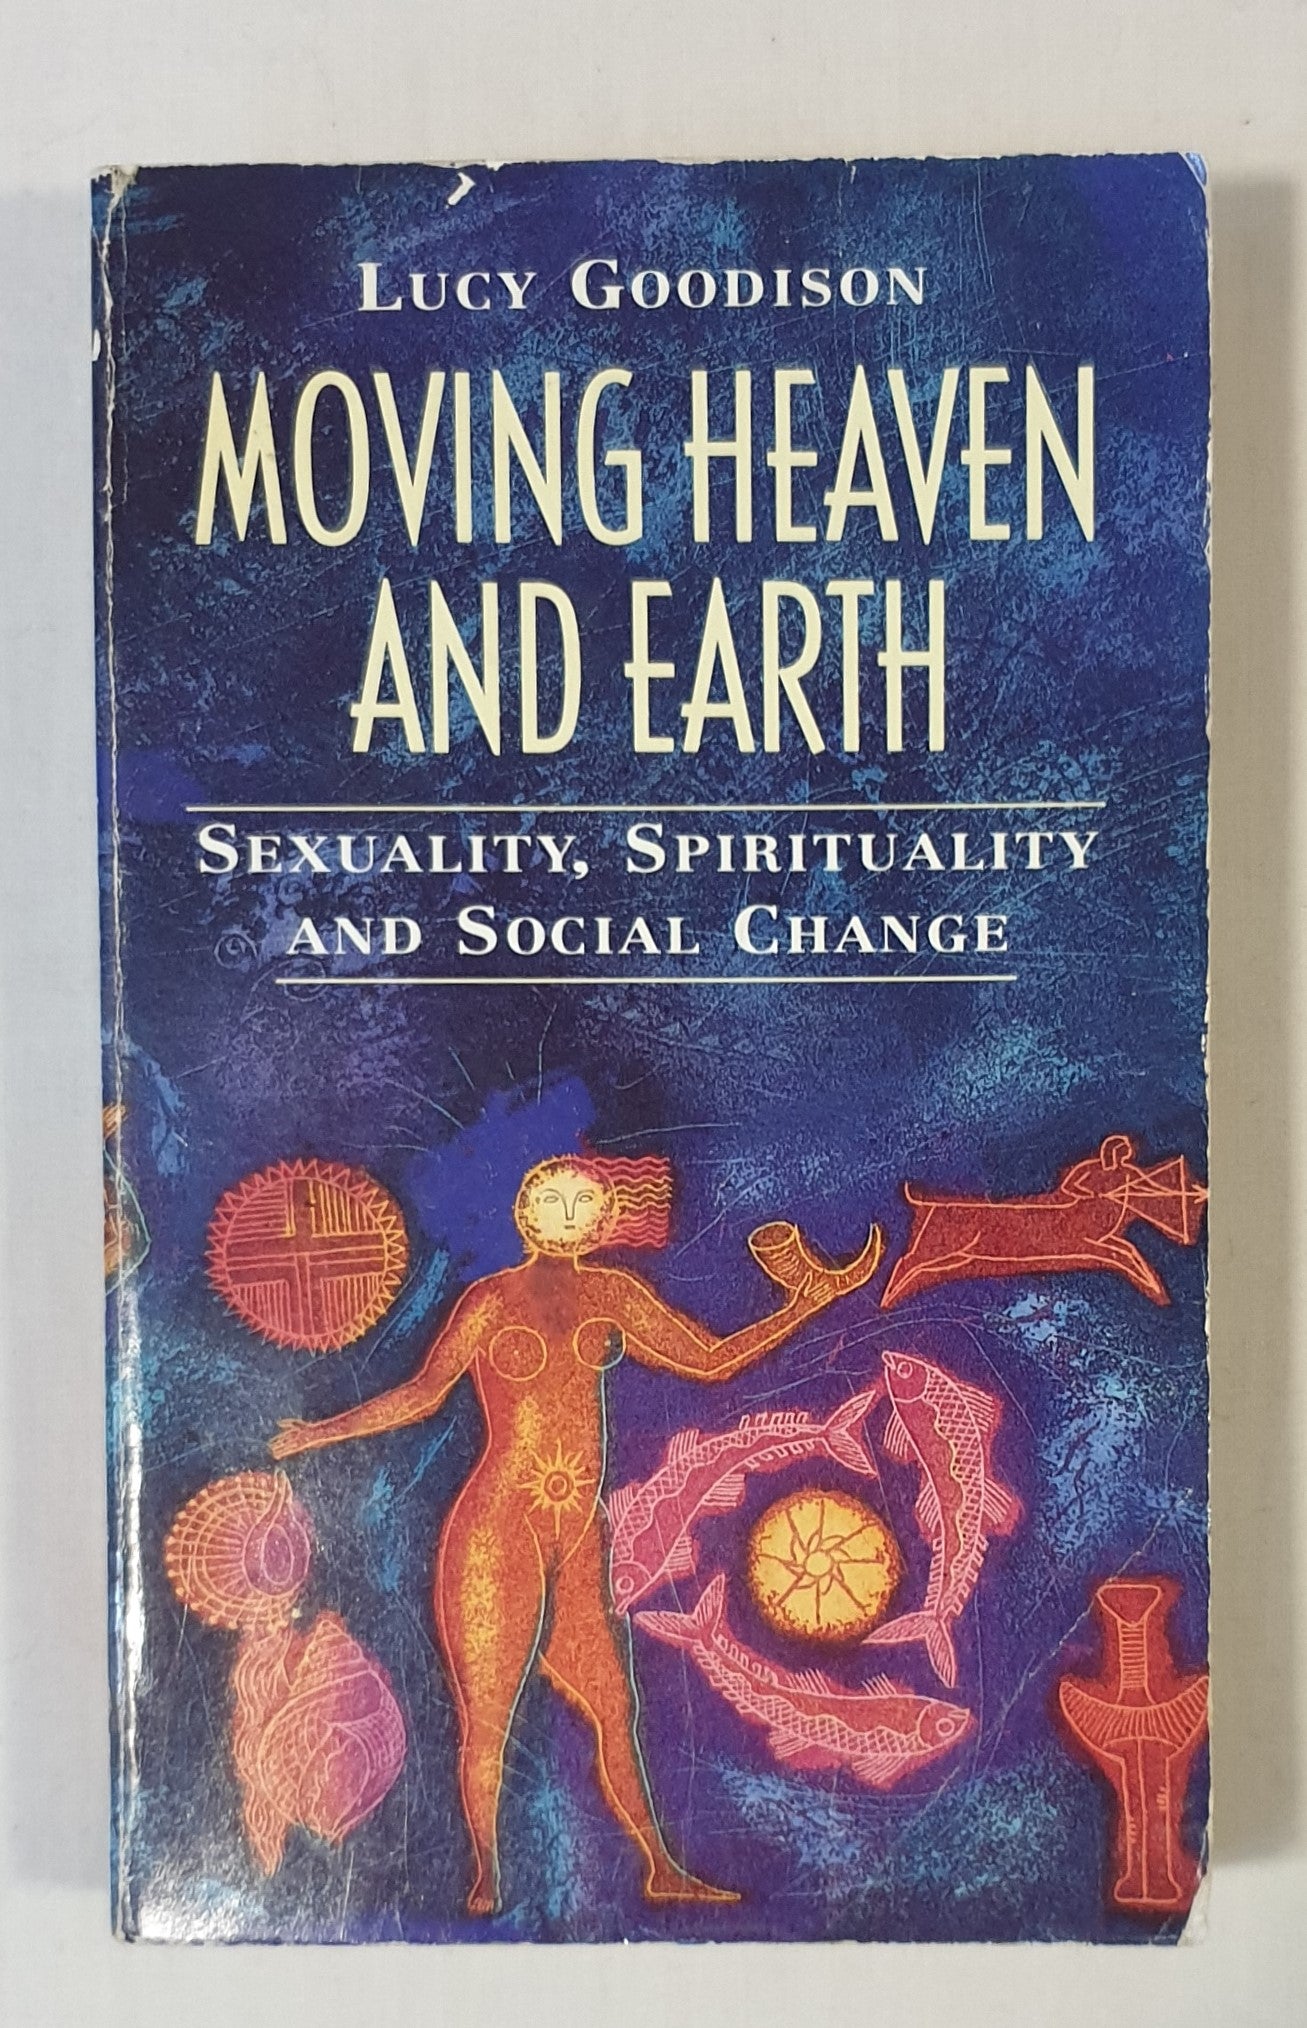 Moving Heaven and Earth by Lucy Goodison